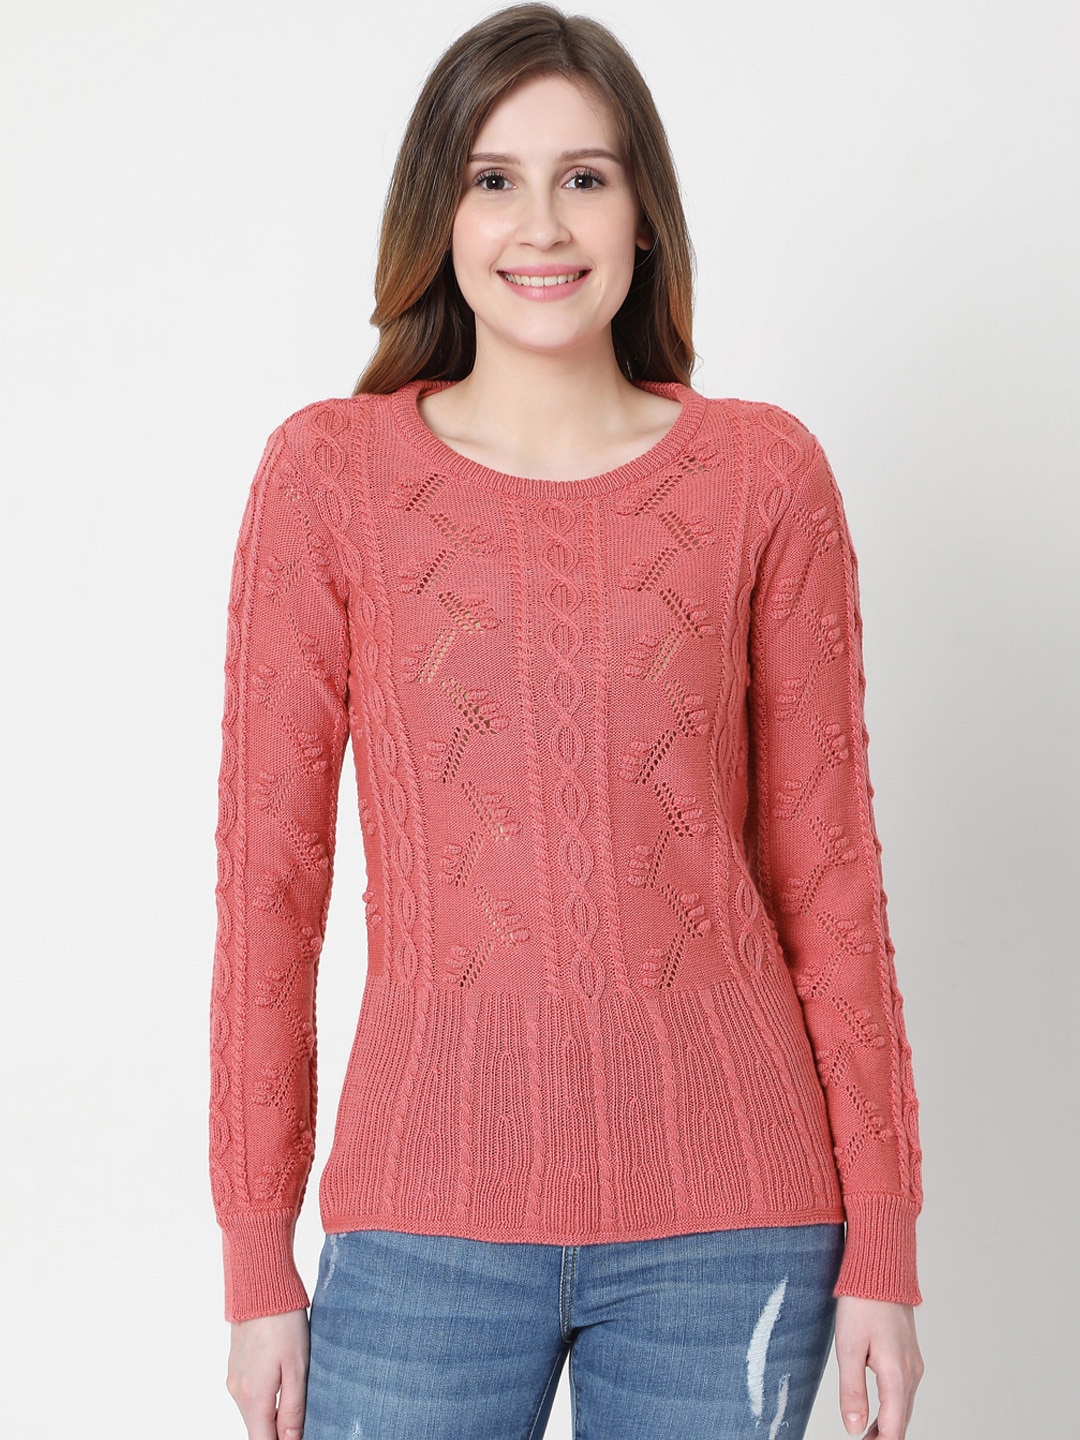 Vero Moda Women Coral Pink Cable Knit Pullover Sweater Price in India